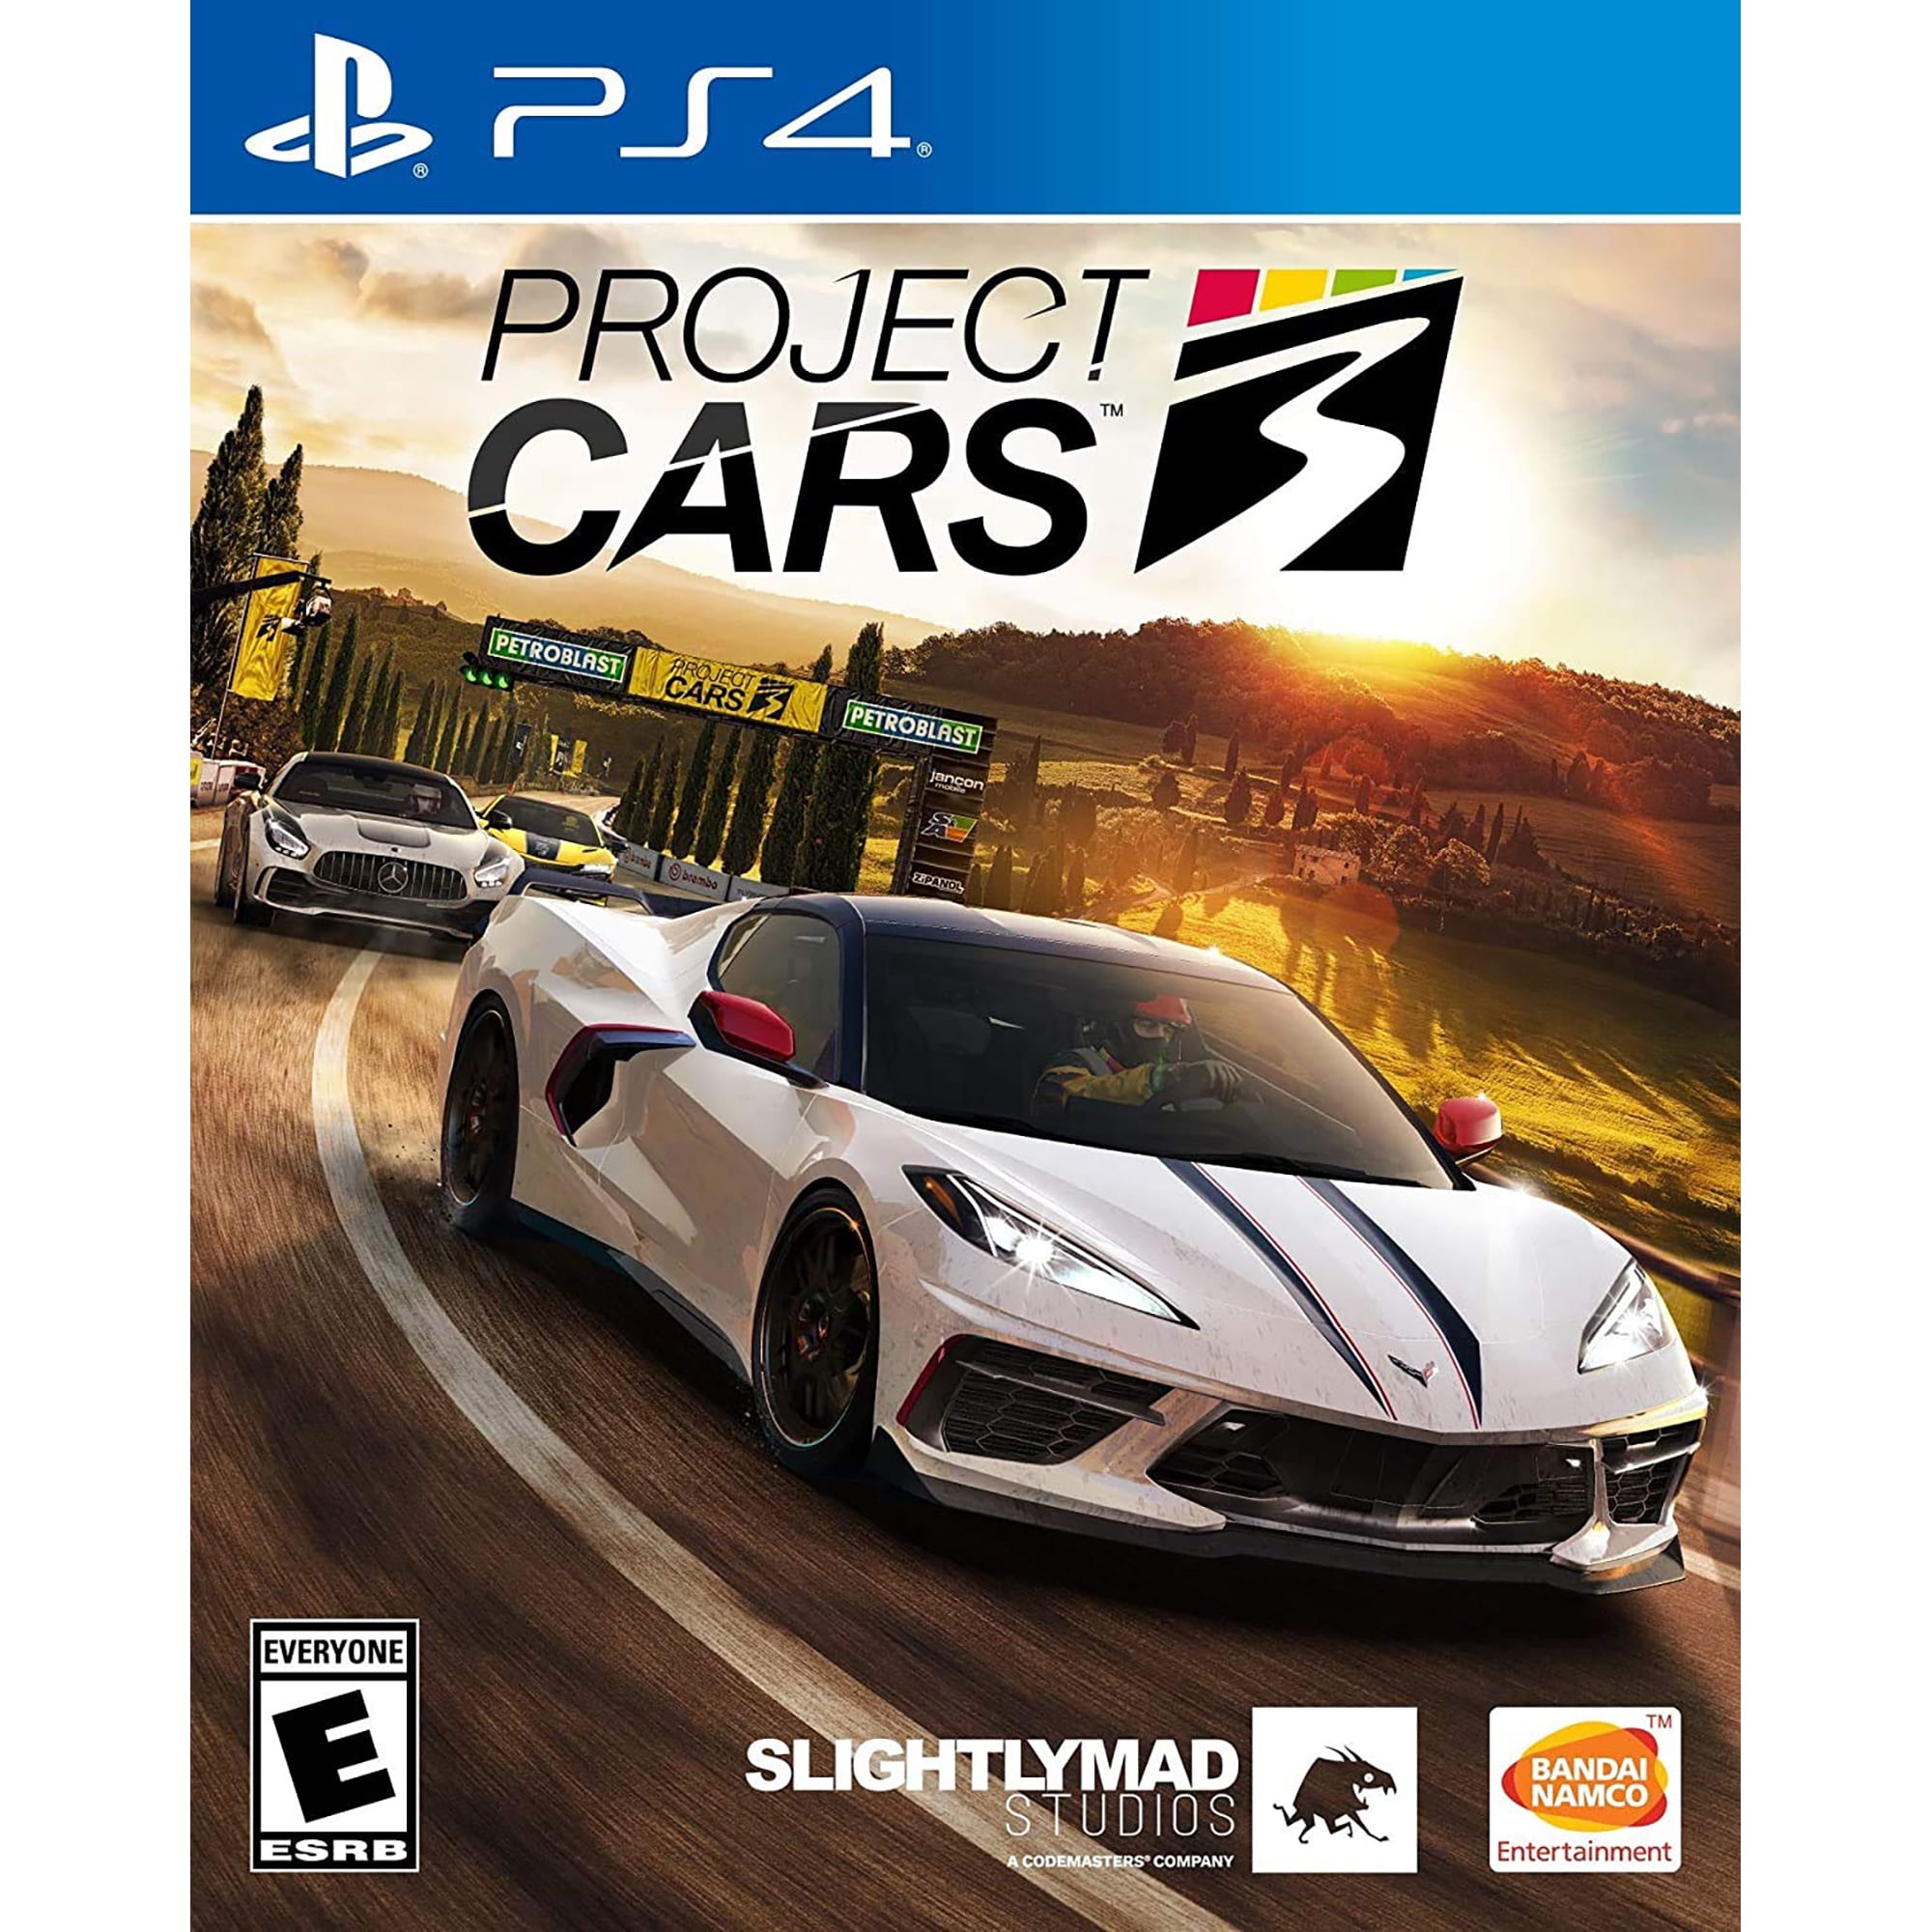 Project Cars 3 (PS4) 